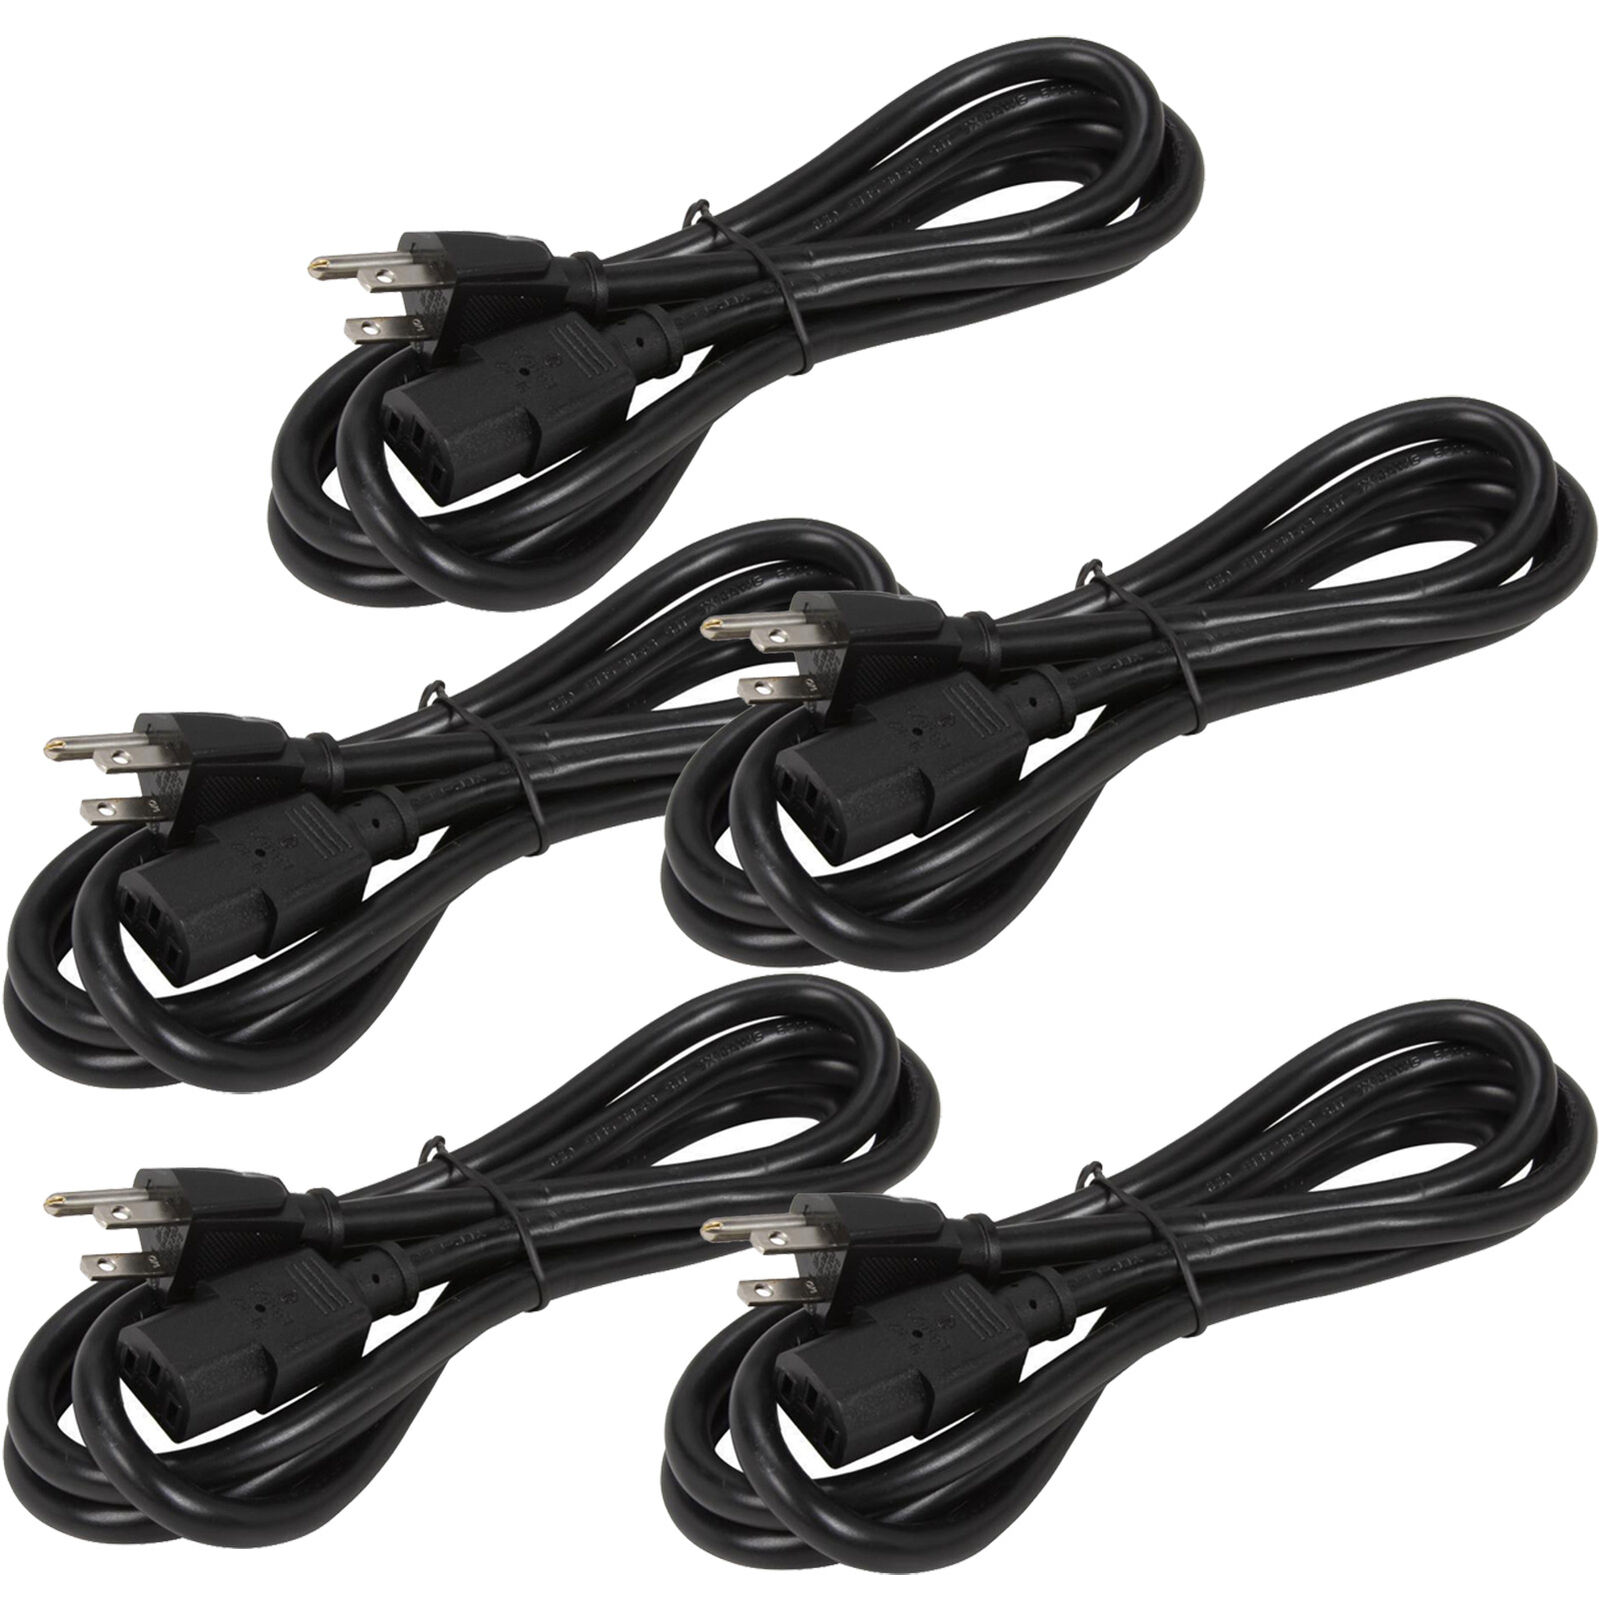 5pk 6ft 16 AWG Universal Power Cord (IEC320 C13 to NEMA 5-15P) PC Ballast Cables